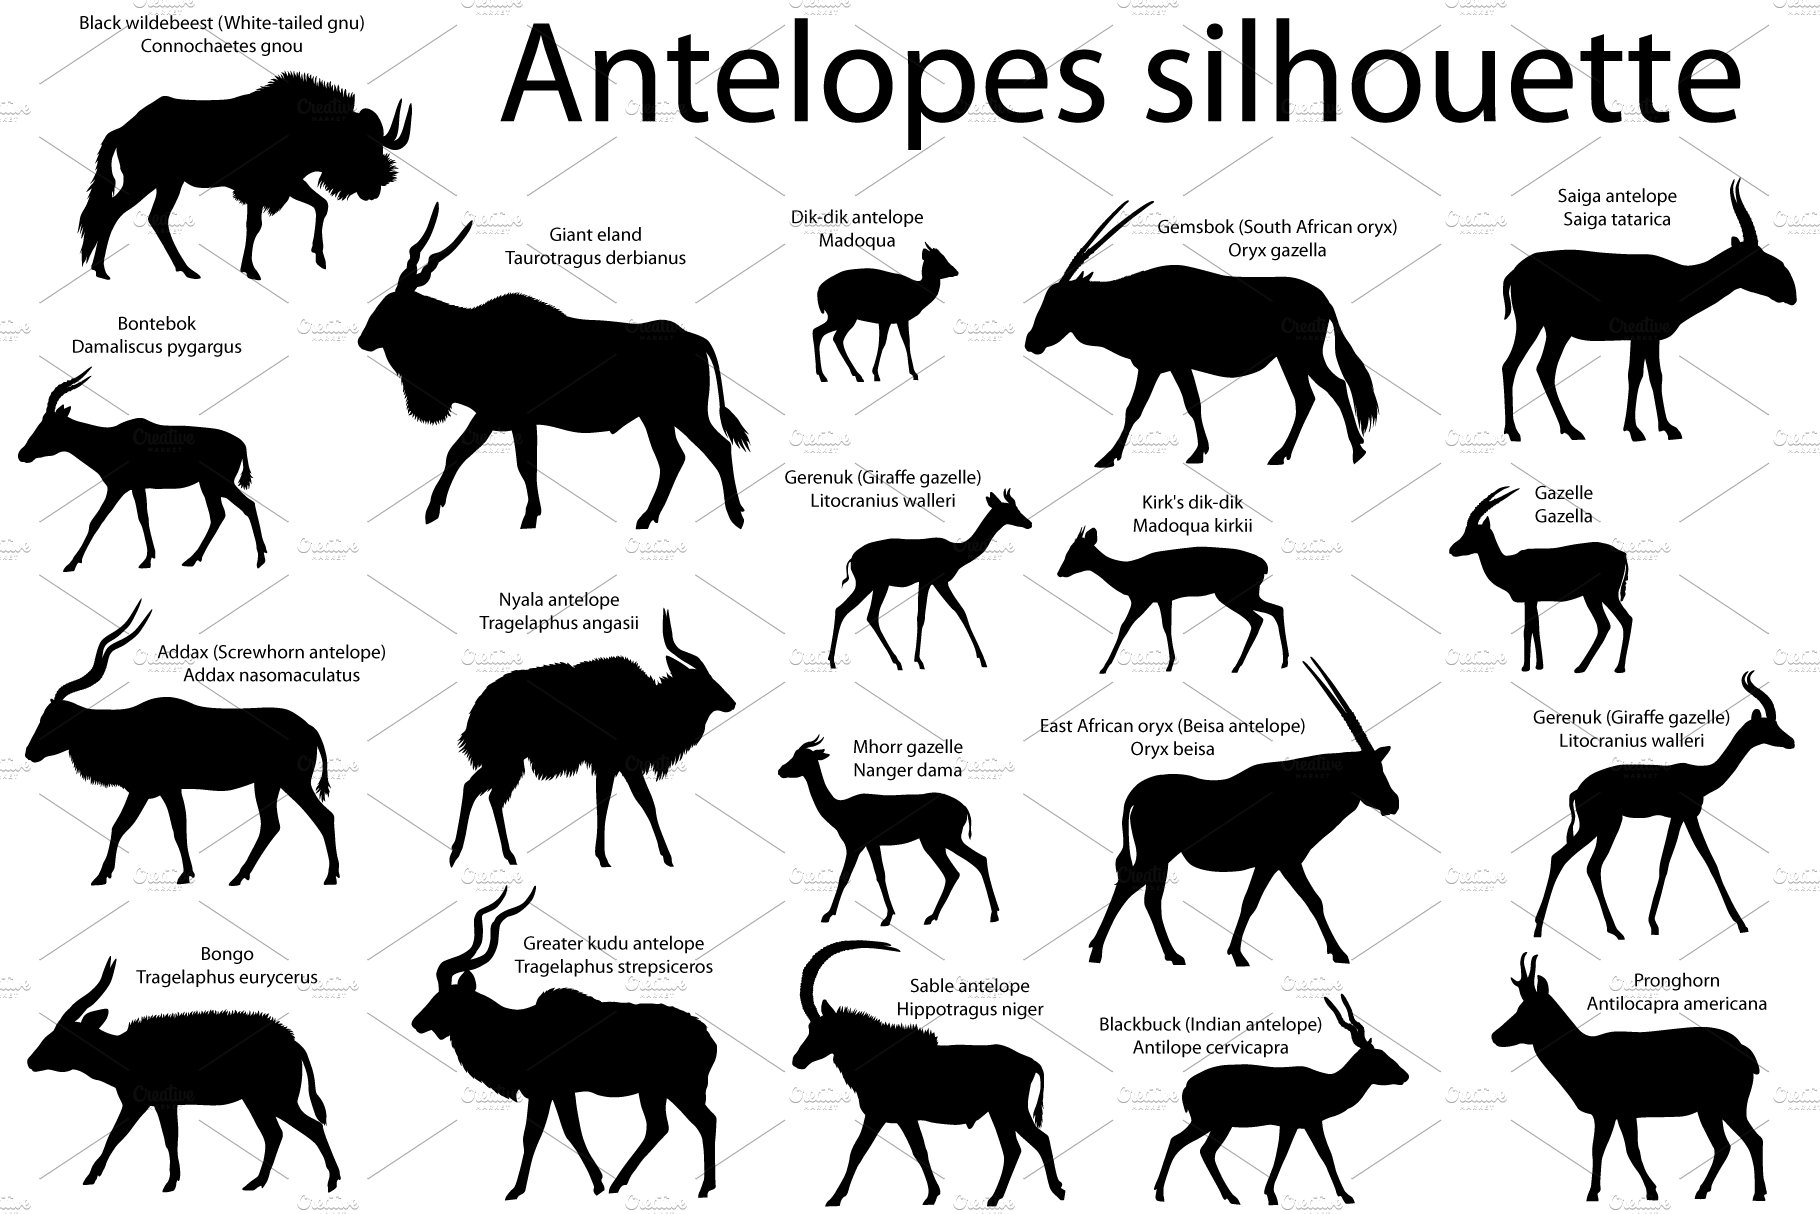 Antelopes silhouette cover image.